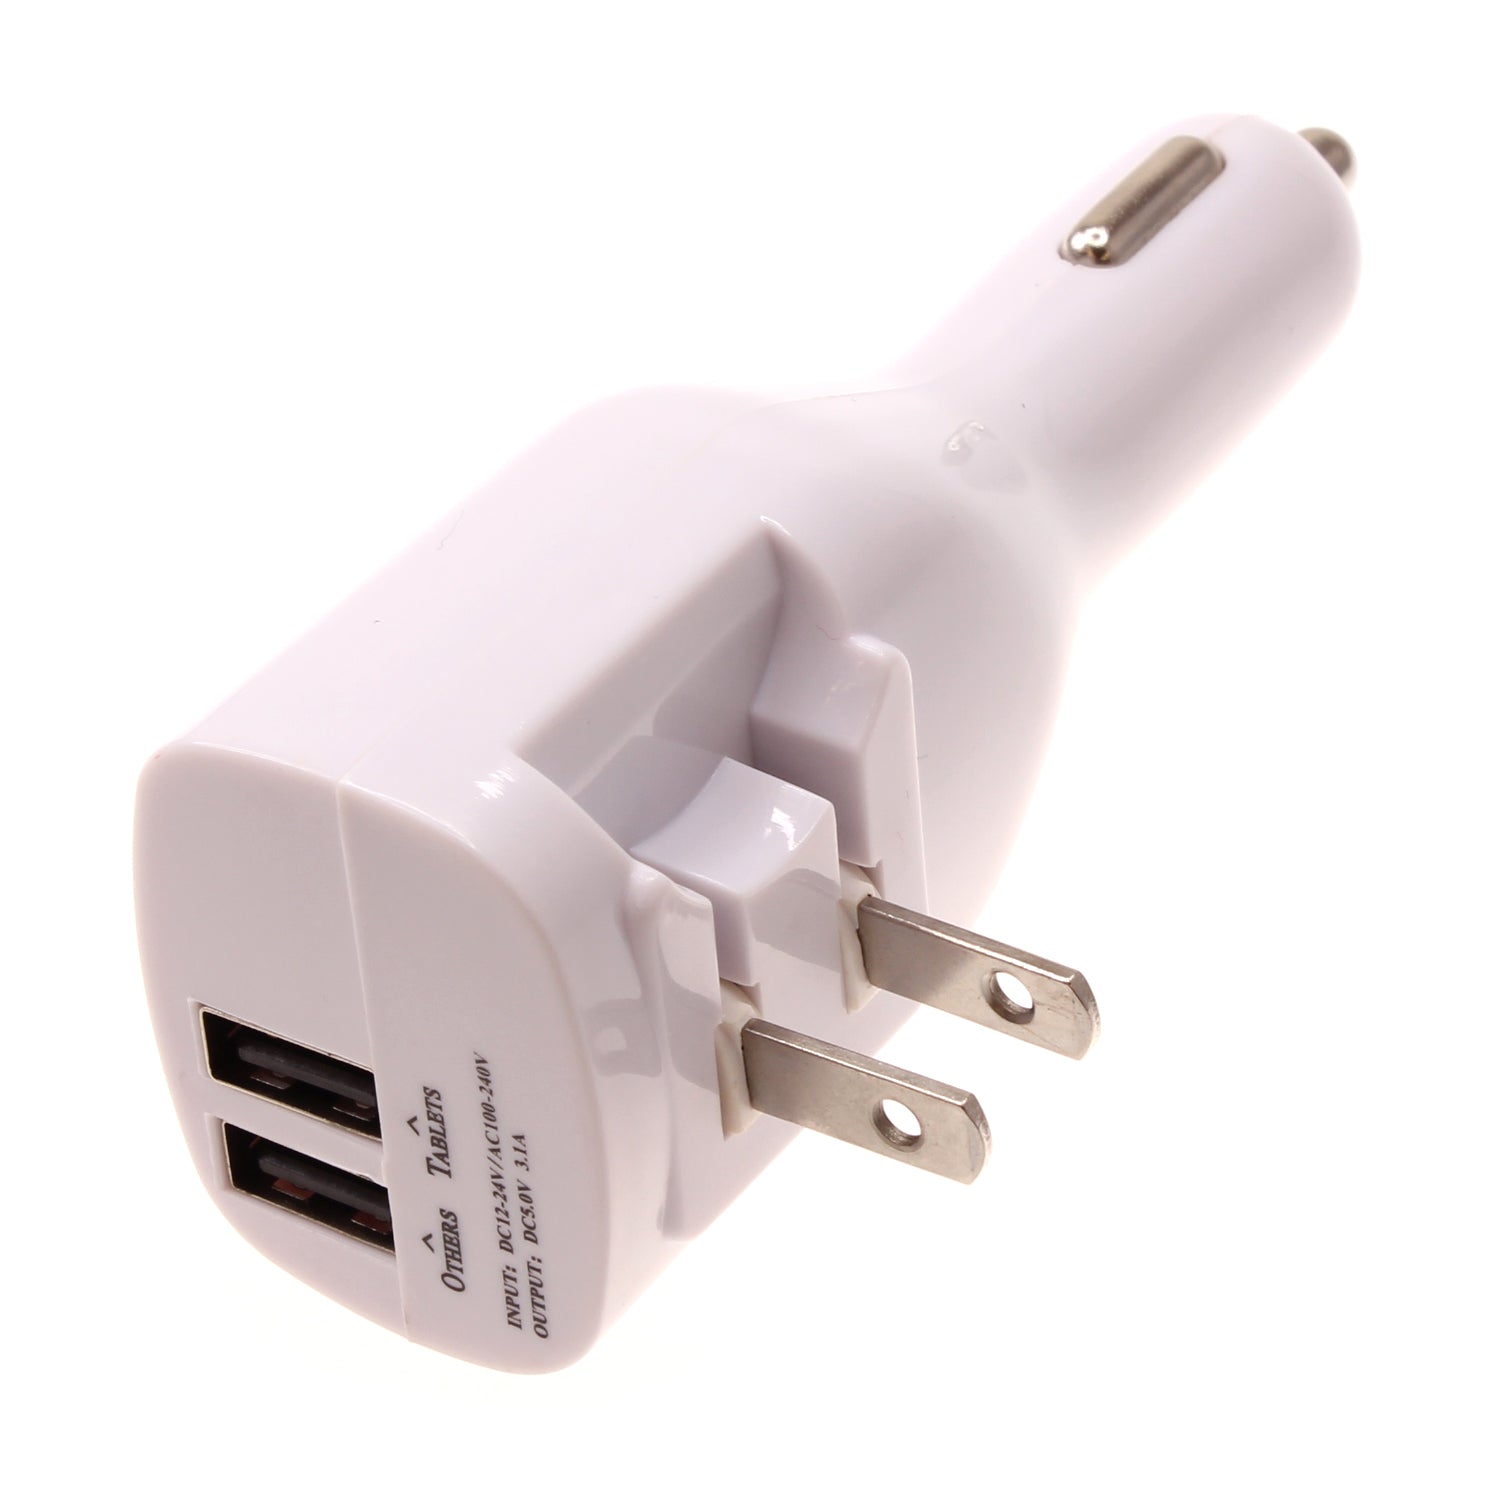 2-in-1 Car Home Charger 6ft Long USB-C Cable TYPE-C Cord Travel Power Adapter Charging Wire Folding Prongs - ONY12